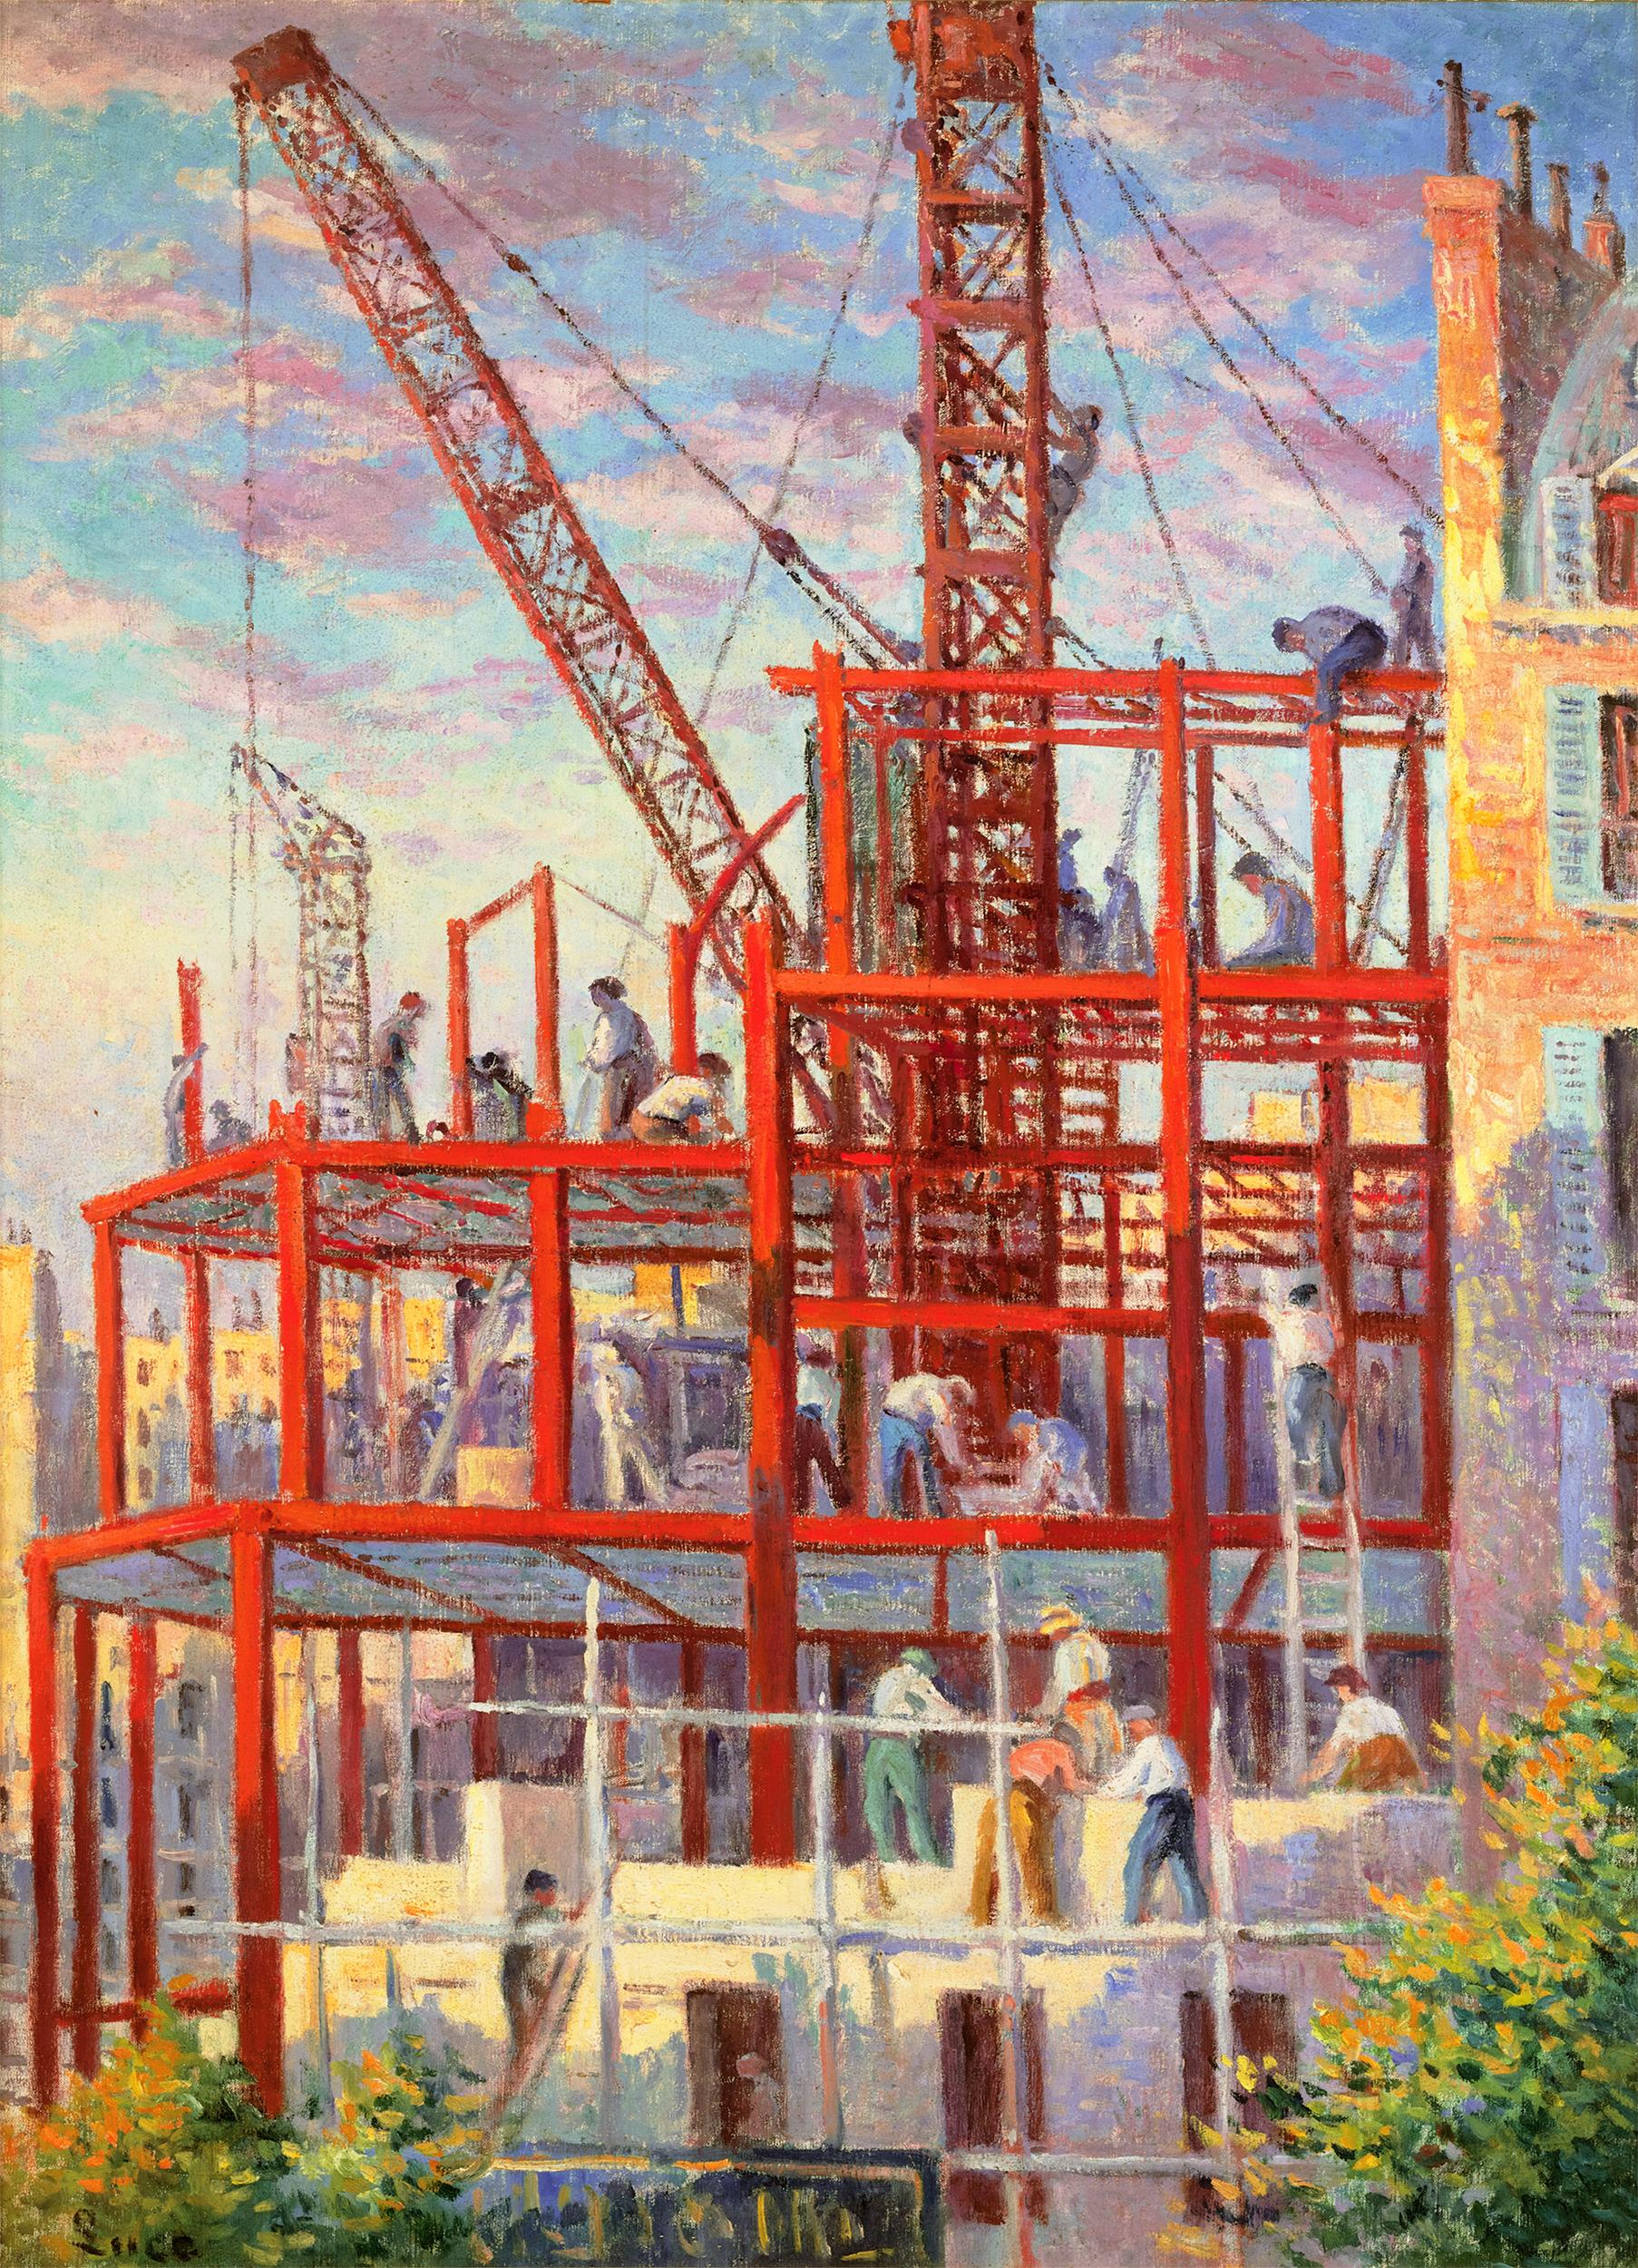 Maximilien Luce
1858-1941  French

Chantier rue Royale
("Construction Site at Rue Royale")

Oil on canvas
Signed "Luce" (lower right)

The struggle between nature, urban living and industry is at the center of Chantier rue Royale. Maximilien Luce is